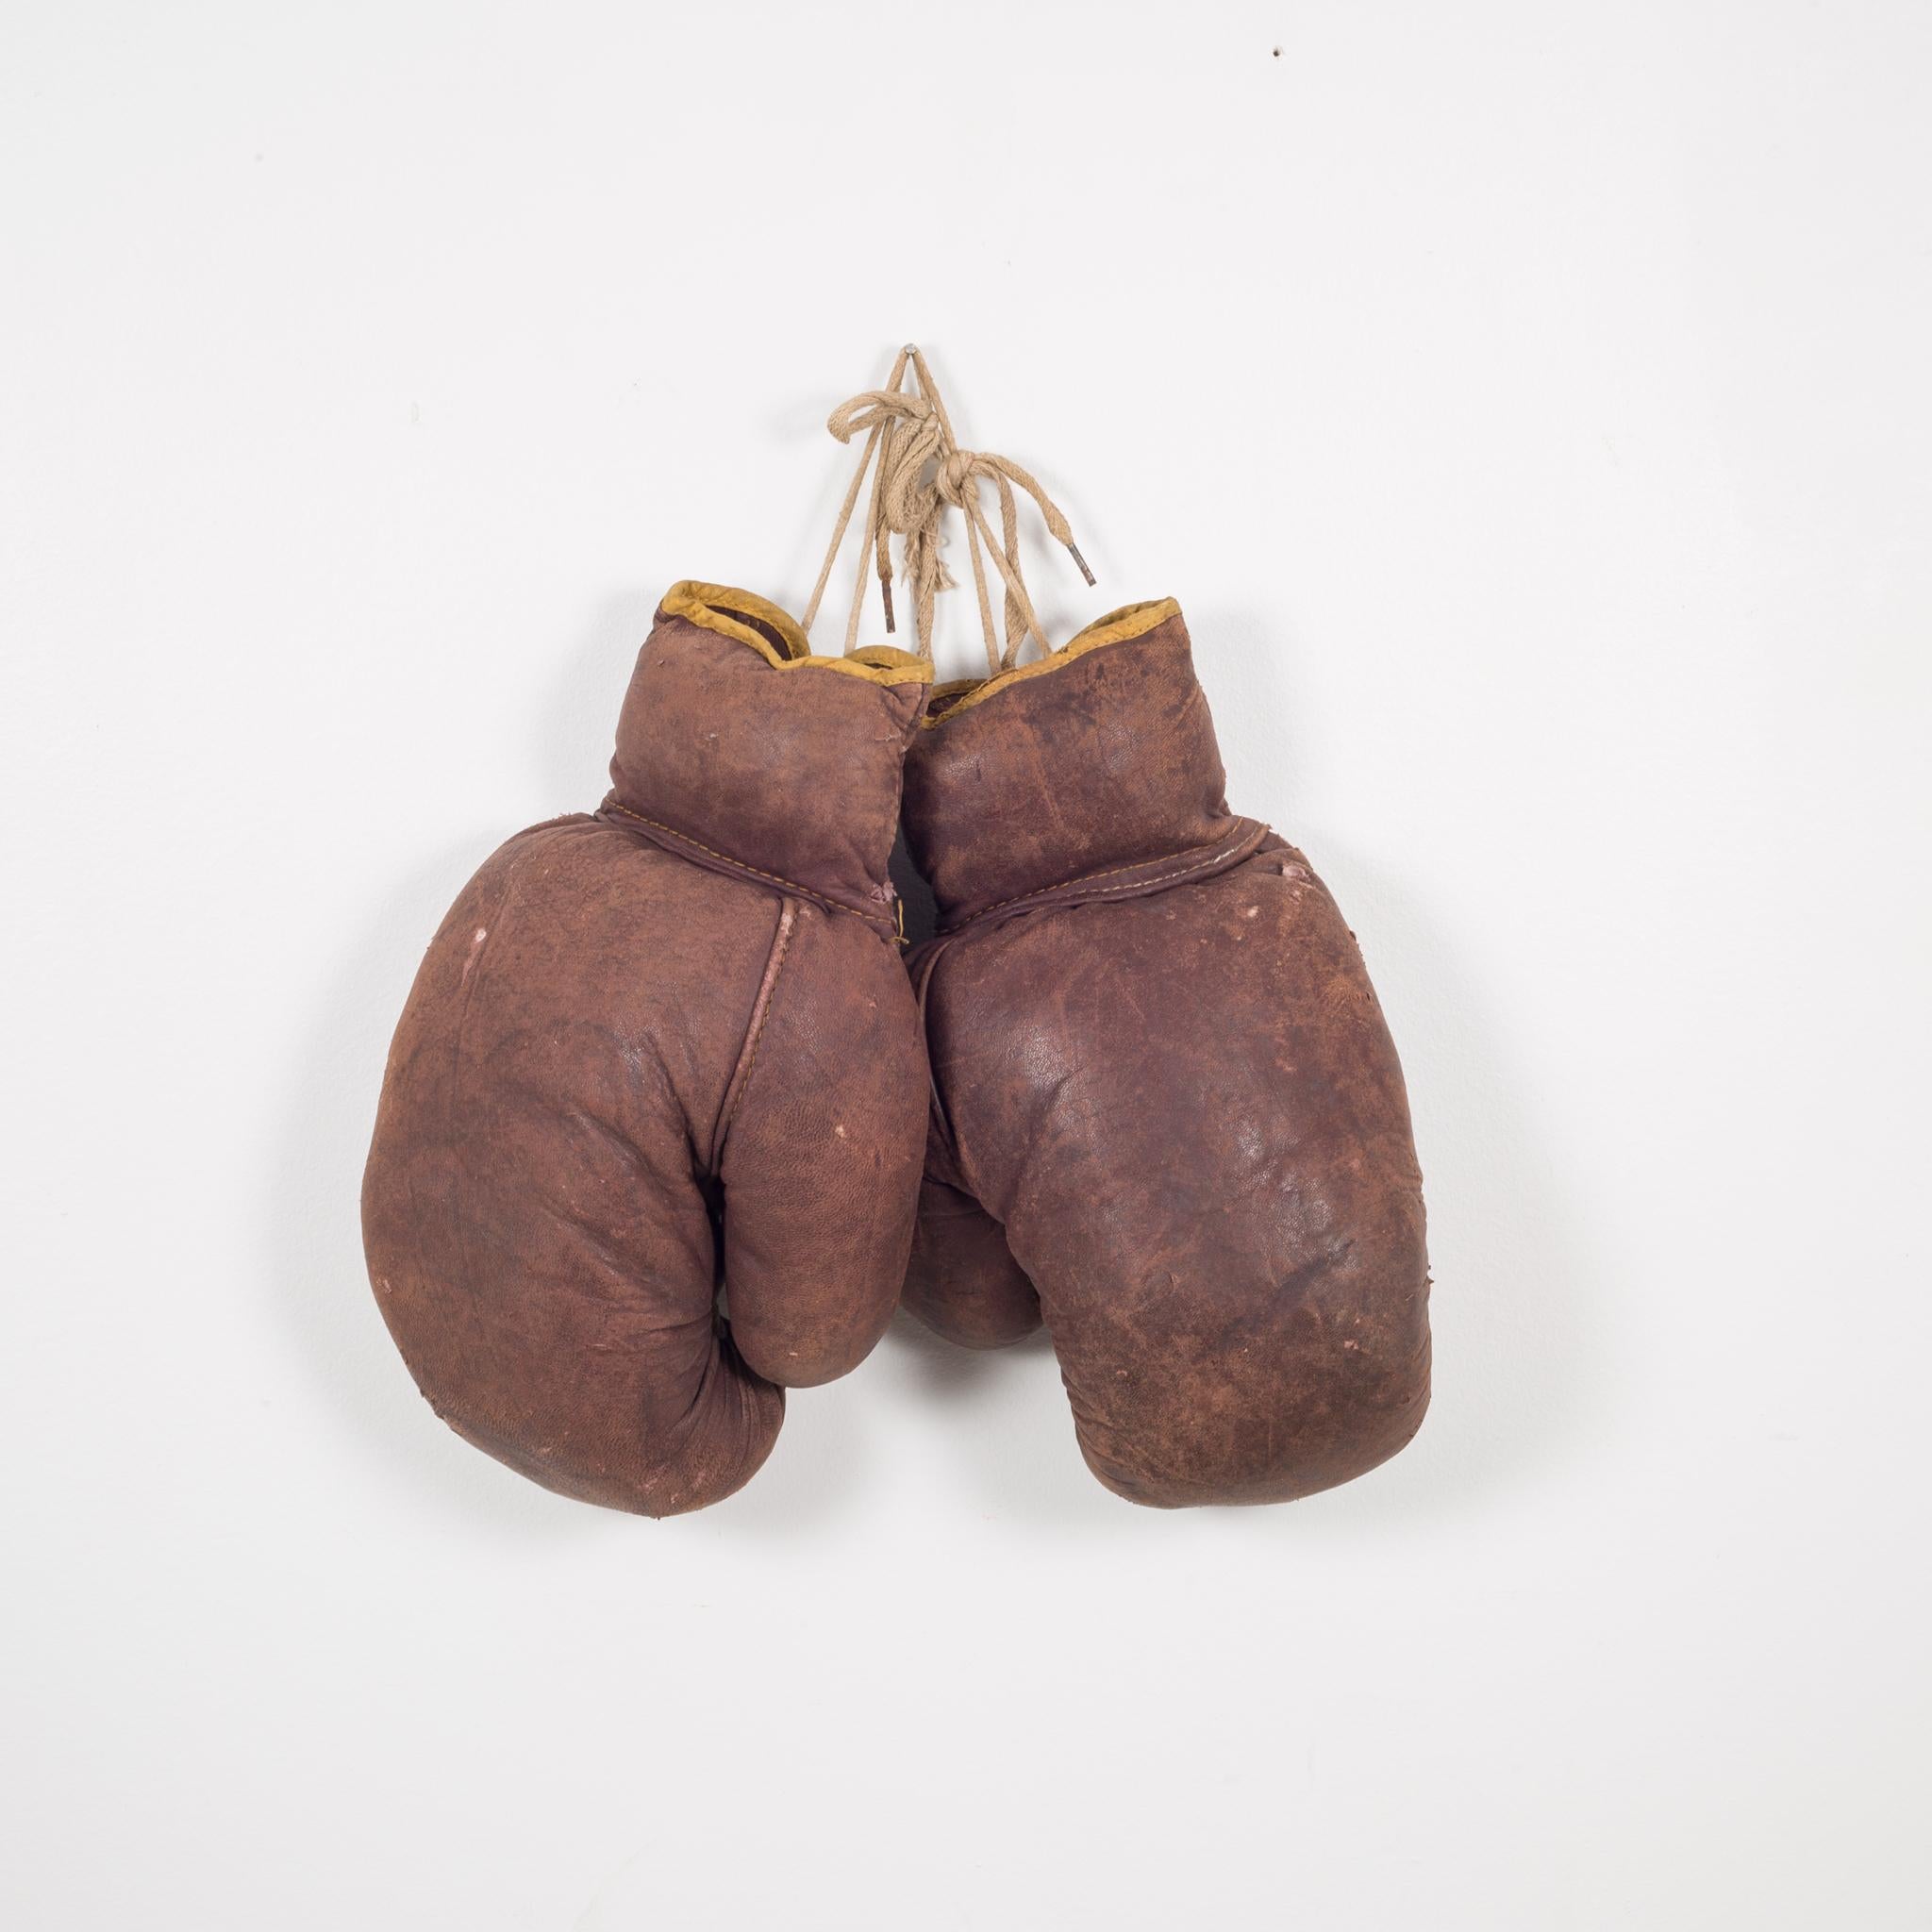 About

This is a original pair of vintage boxing gloves with brown leather and gold leather trim. Each glove has retained it's original color with minor blemishes on the leather.

Creator Unknown.
Date of manufacture circa 1940
Materials and